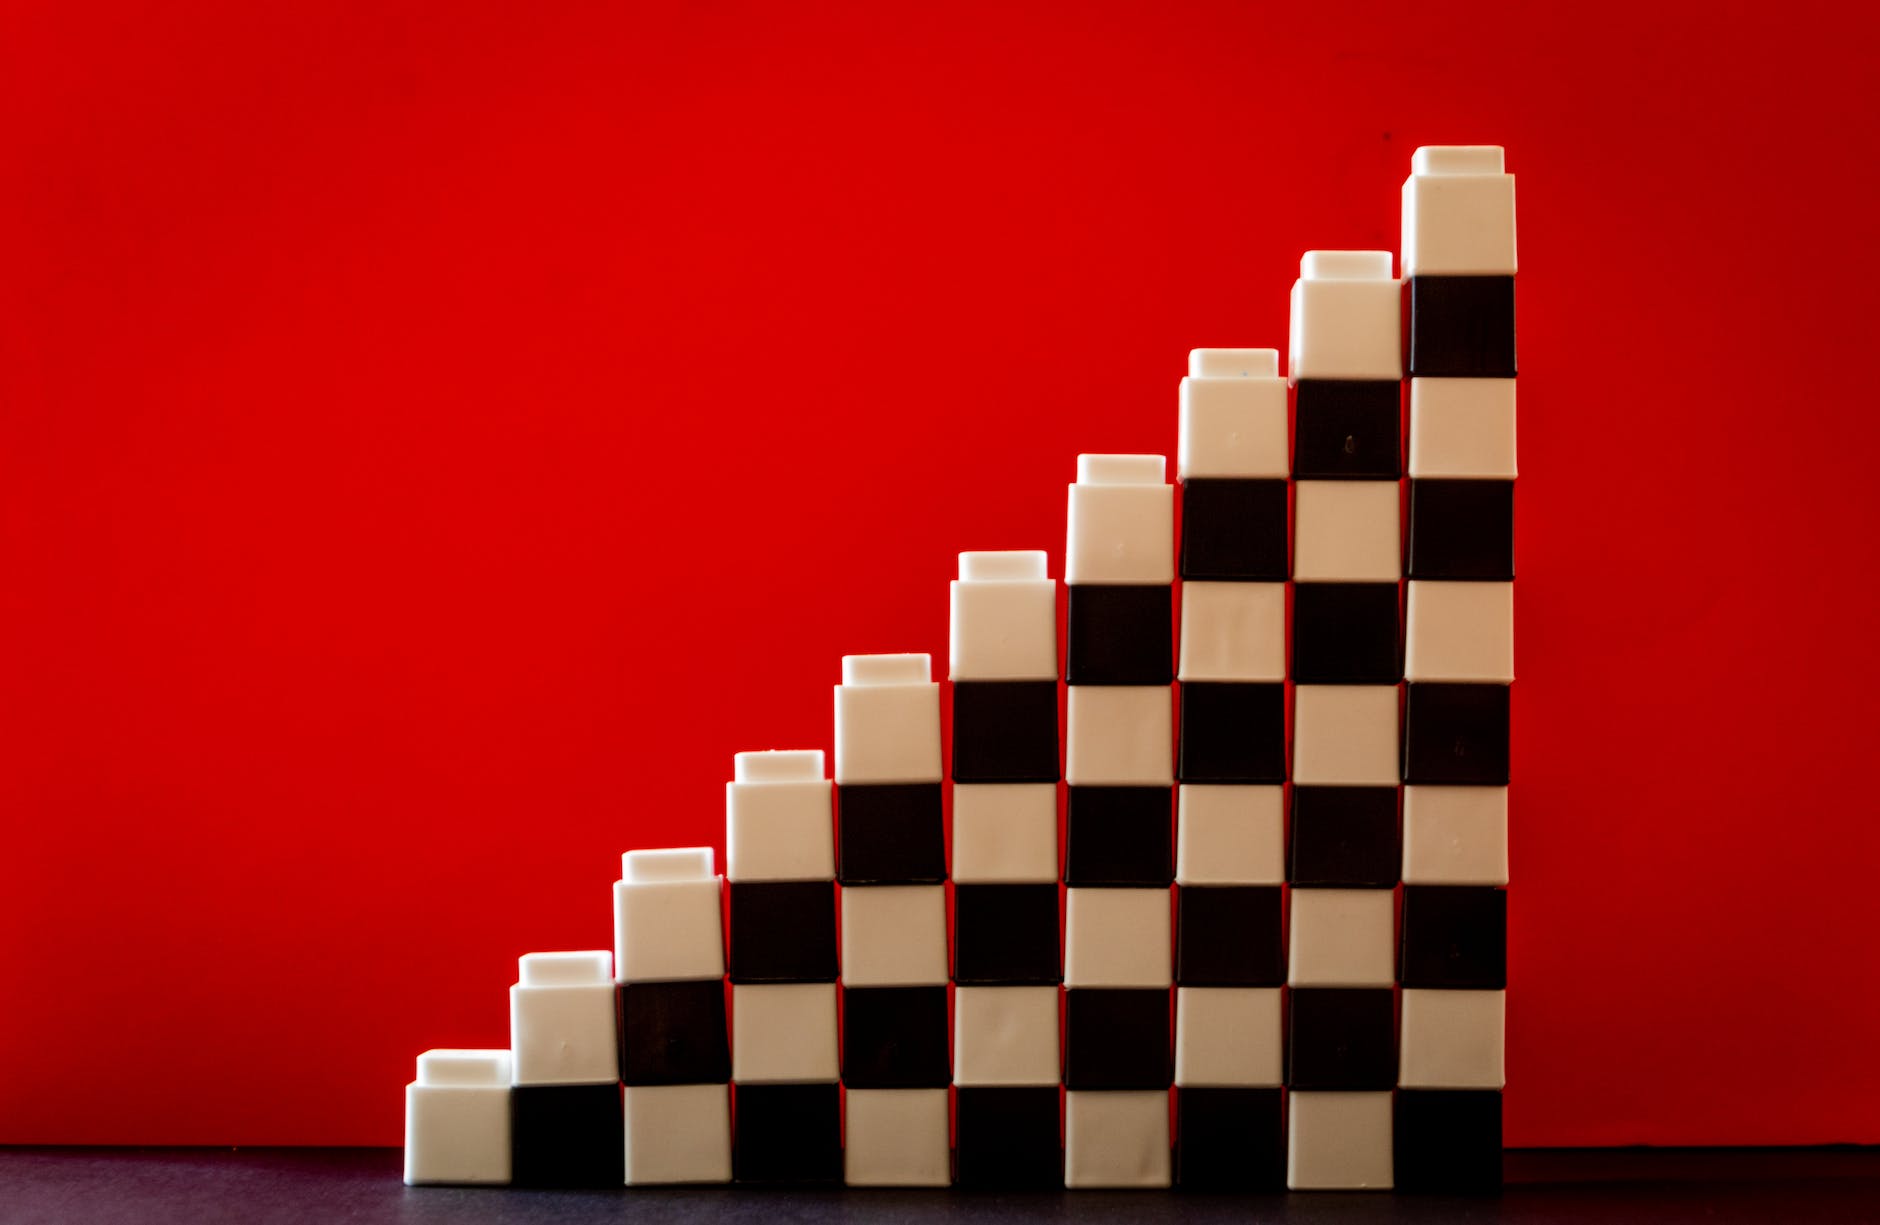 white and black checkered brick toys stacked on top of each other forming ladder